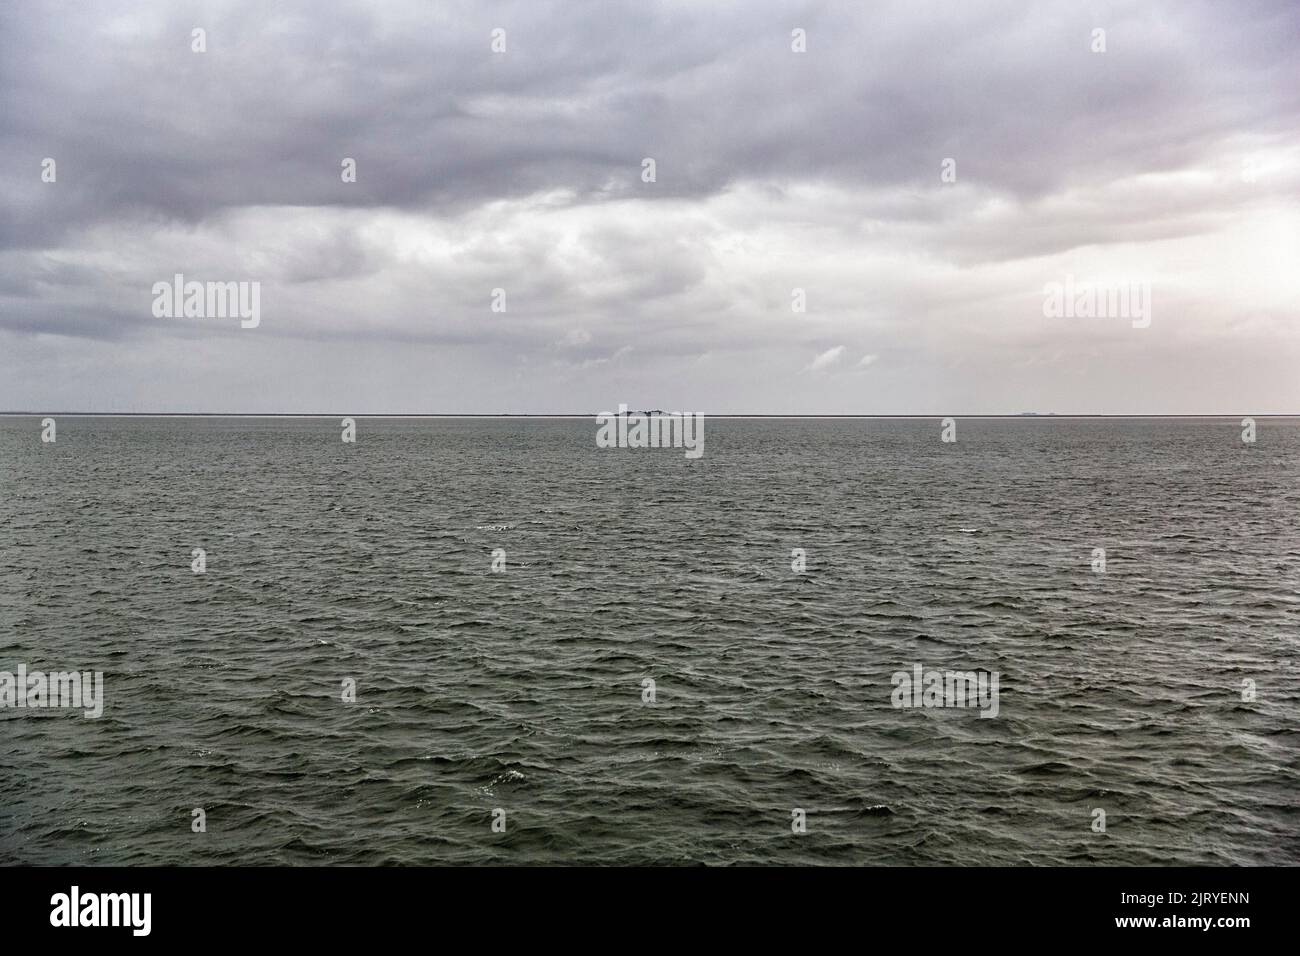 View of the North Sea, dreary weather in autumn, Hallig Langeness on the horizon, cloudy sky, Schleswig-Holstein, Germany Stock Photo